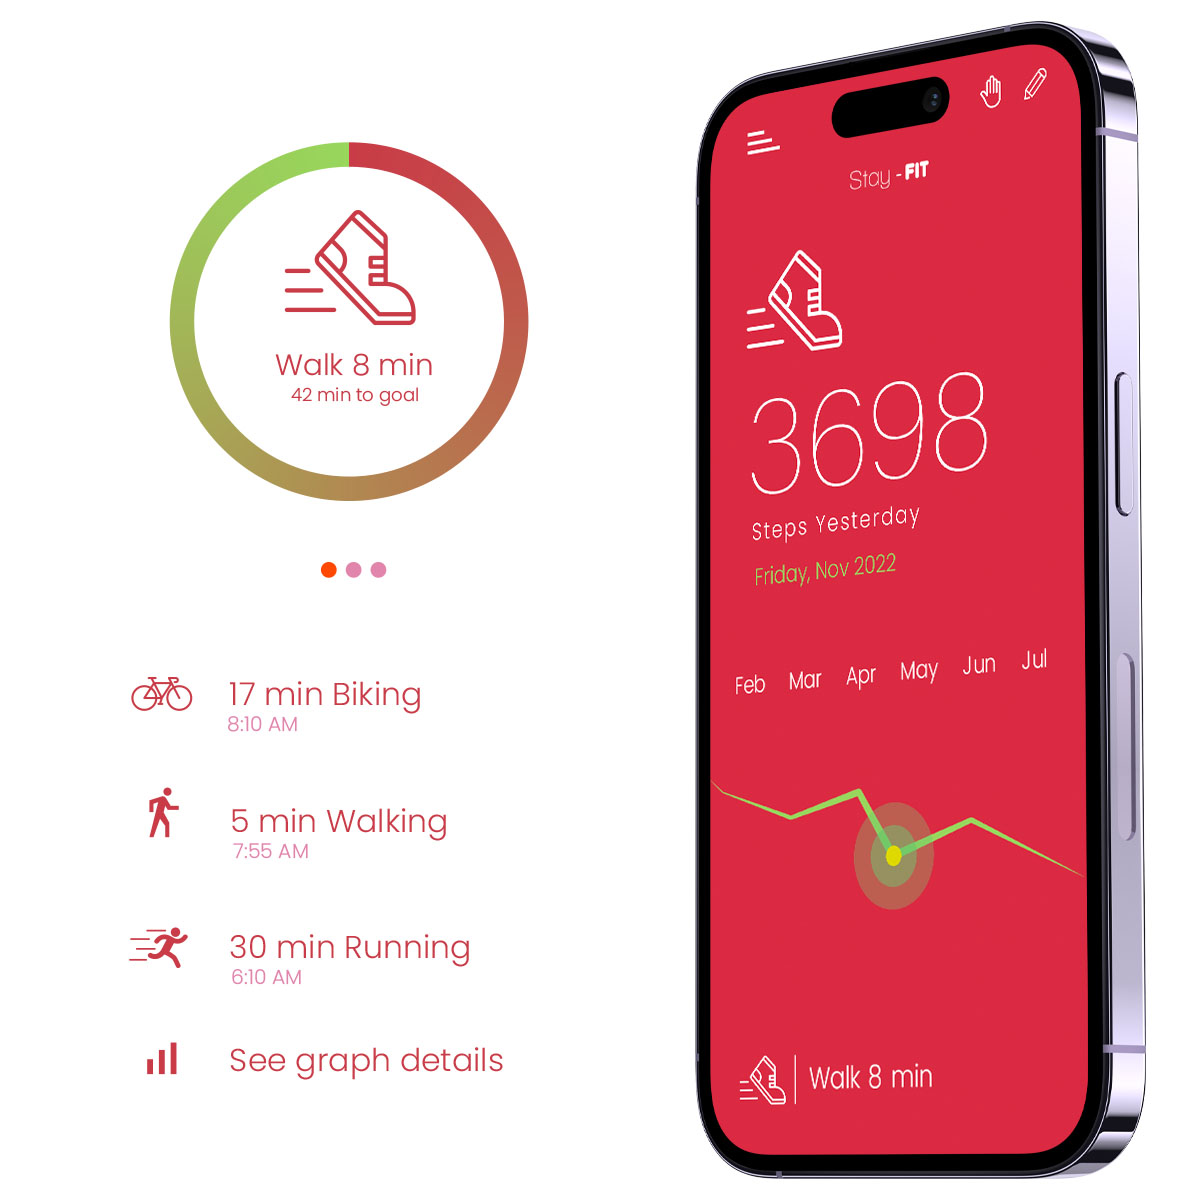 A screenshot of the Zco-created fitness and training smartphone app